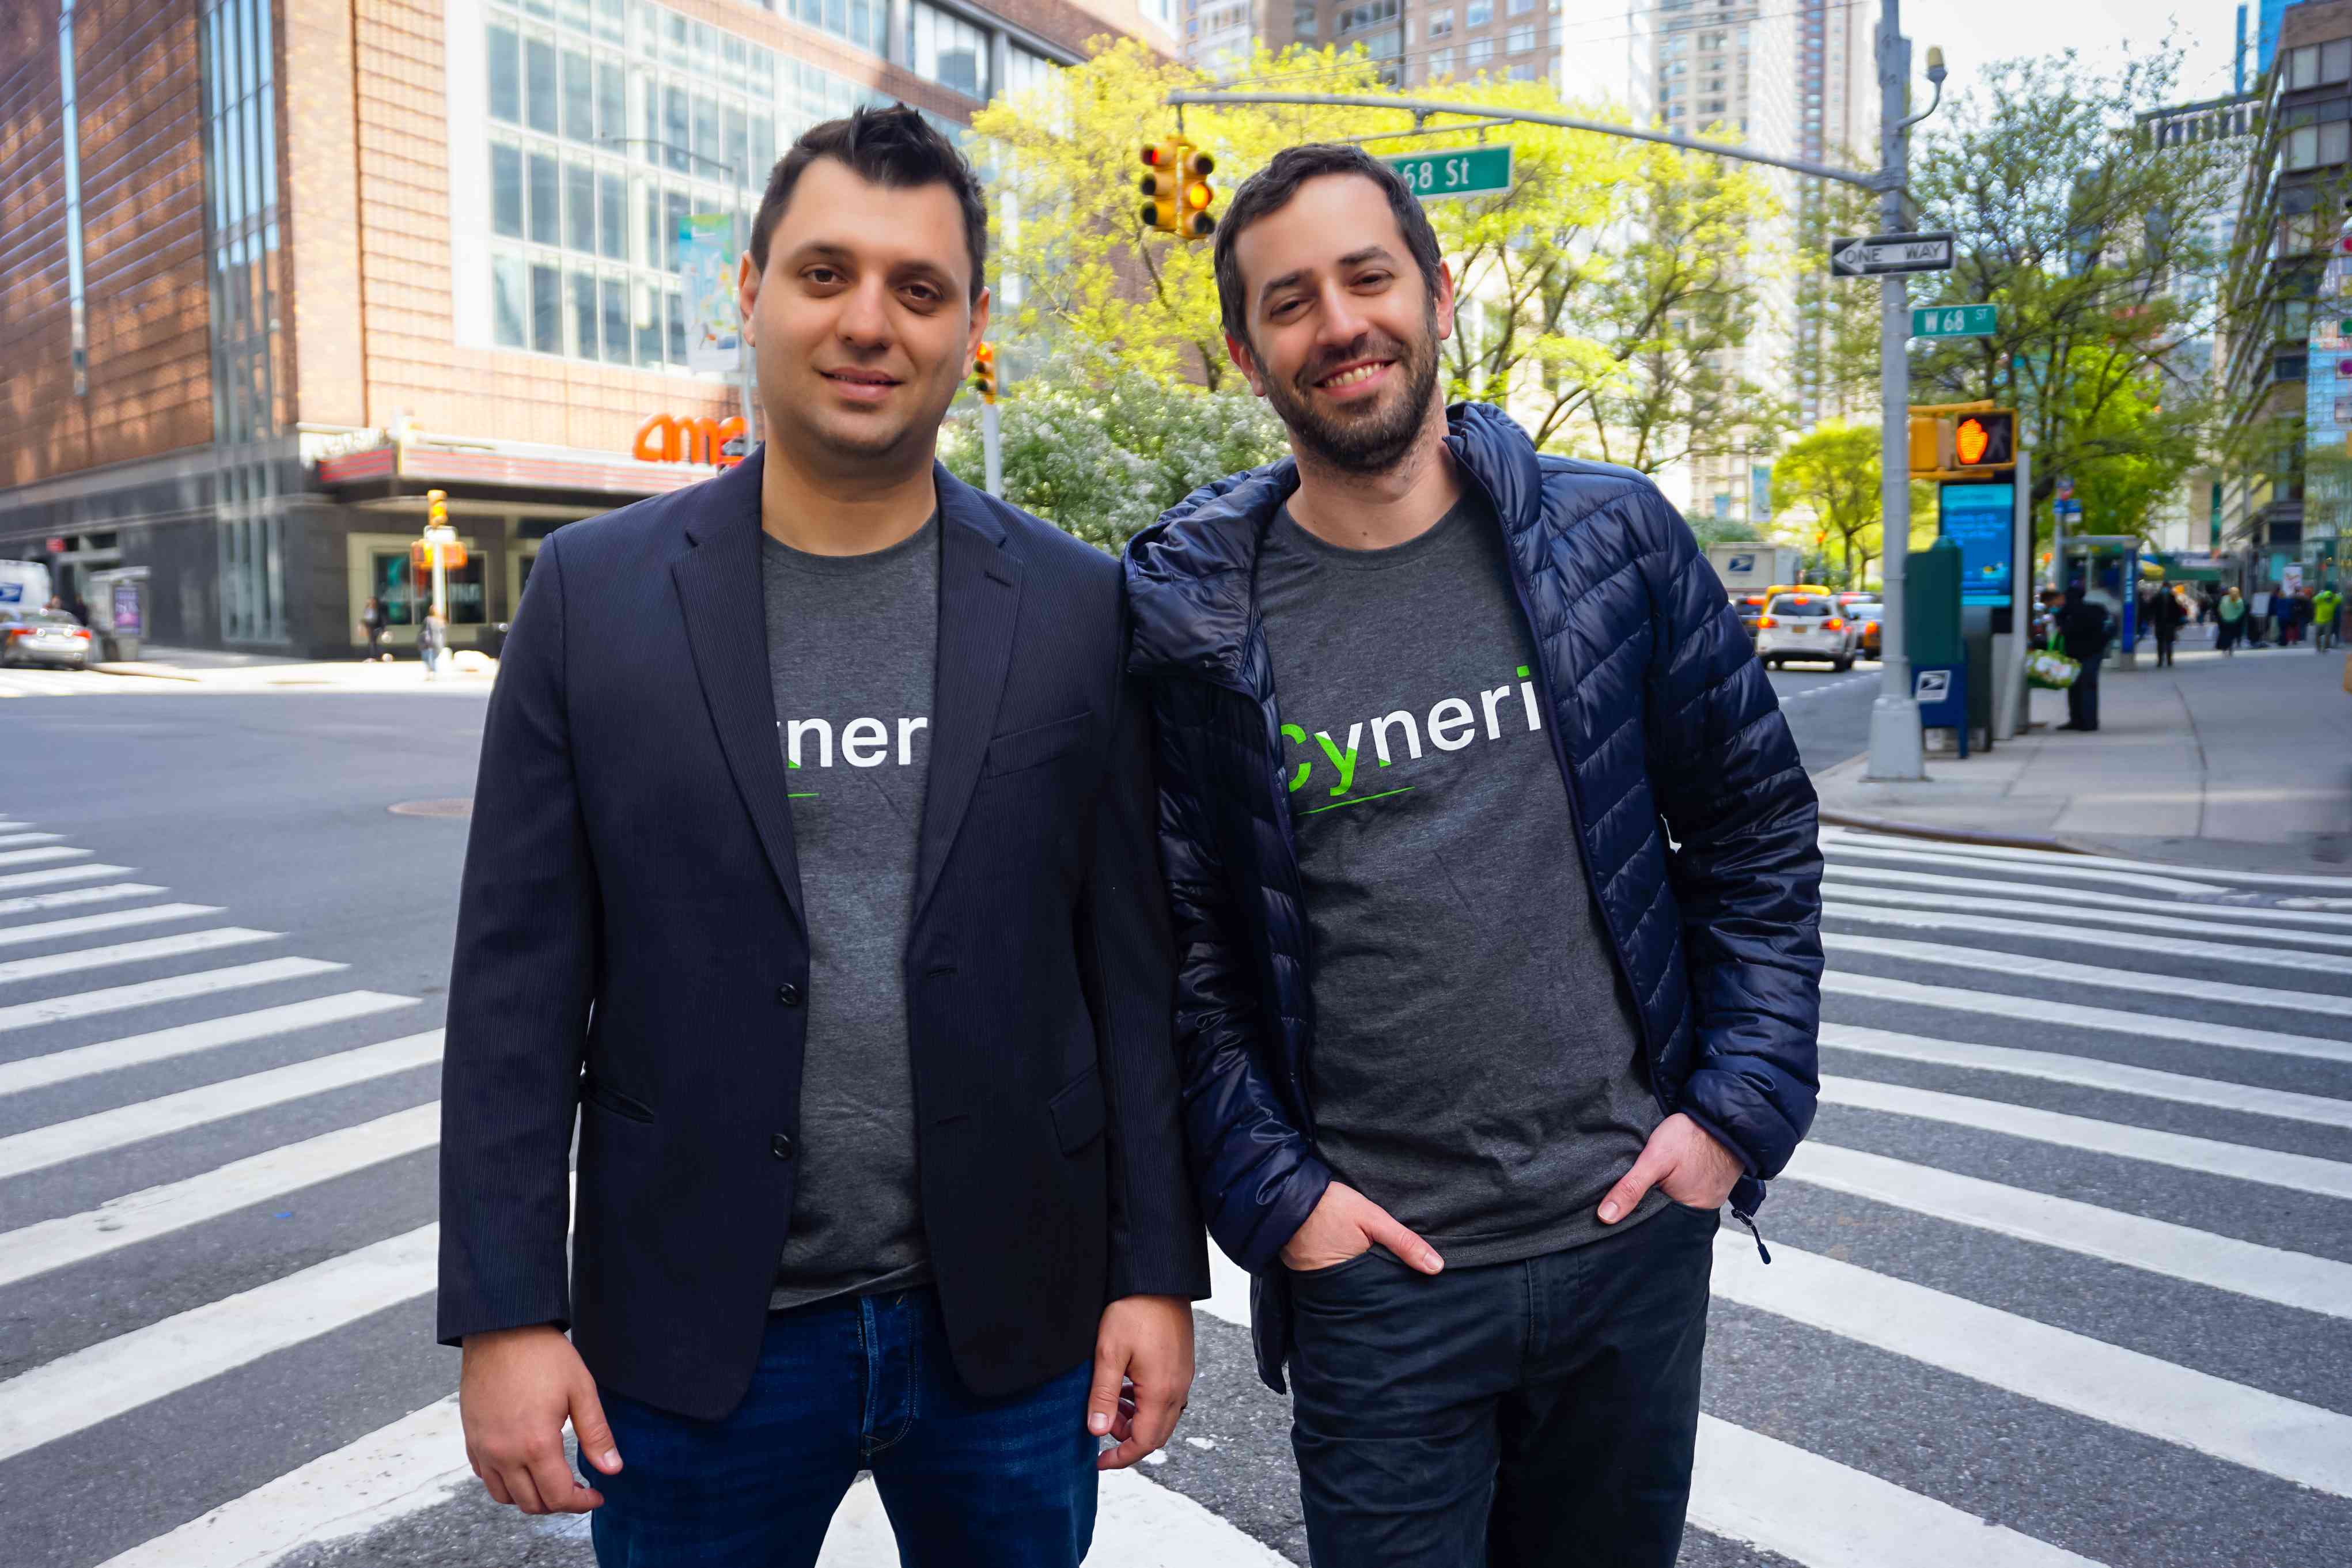 Cynerio Raises $30 Million in Series B Funding to Secure Mission-Critical Medical and IoT Devices in Hospitals and Health Systems